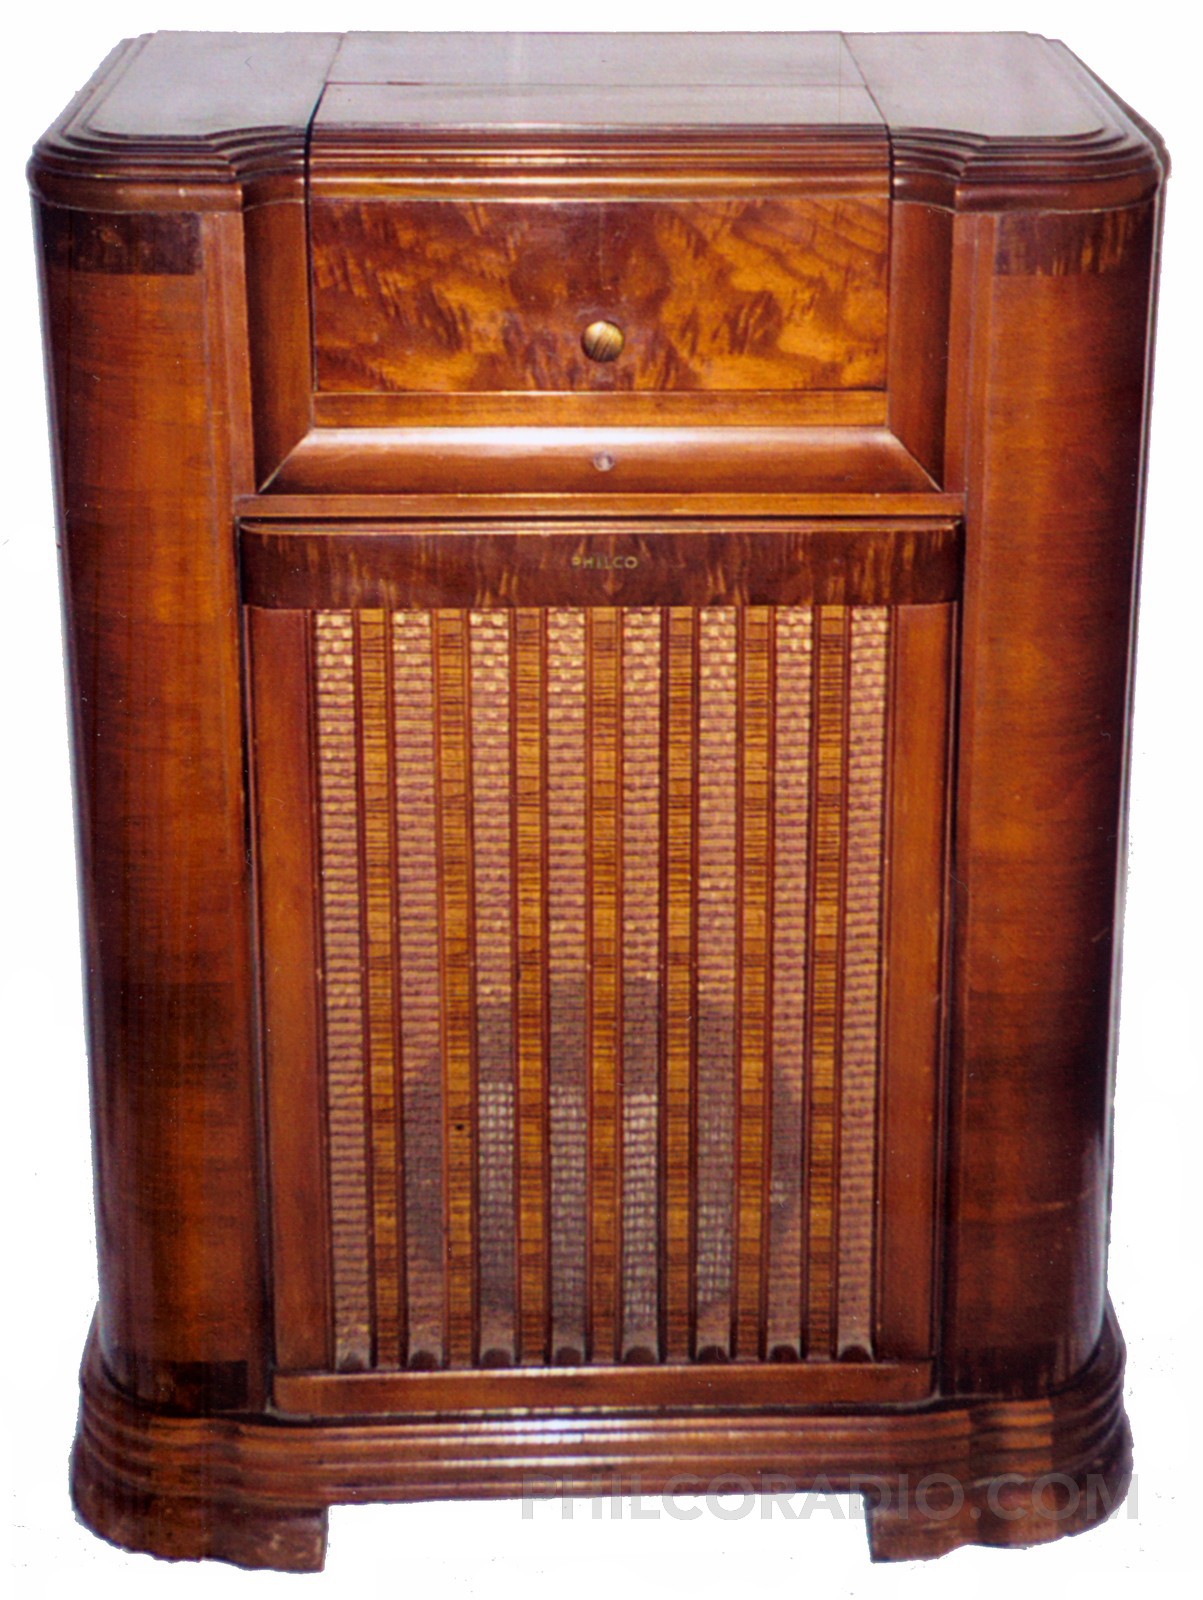 Product Details  Renovated Radios1941 Philco Brown Pushbuttons